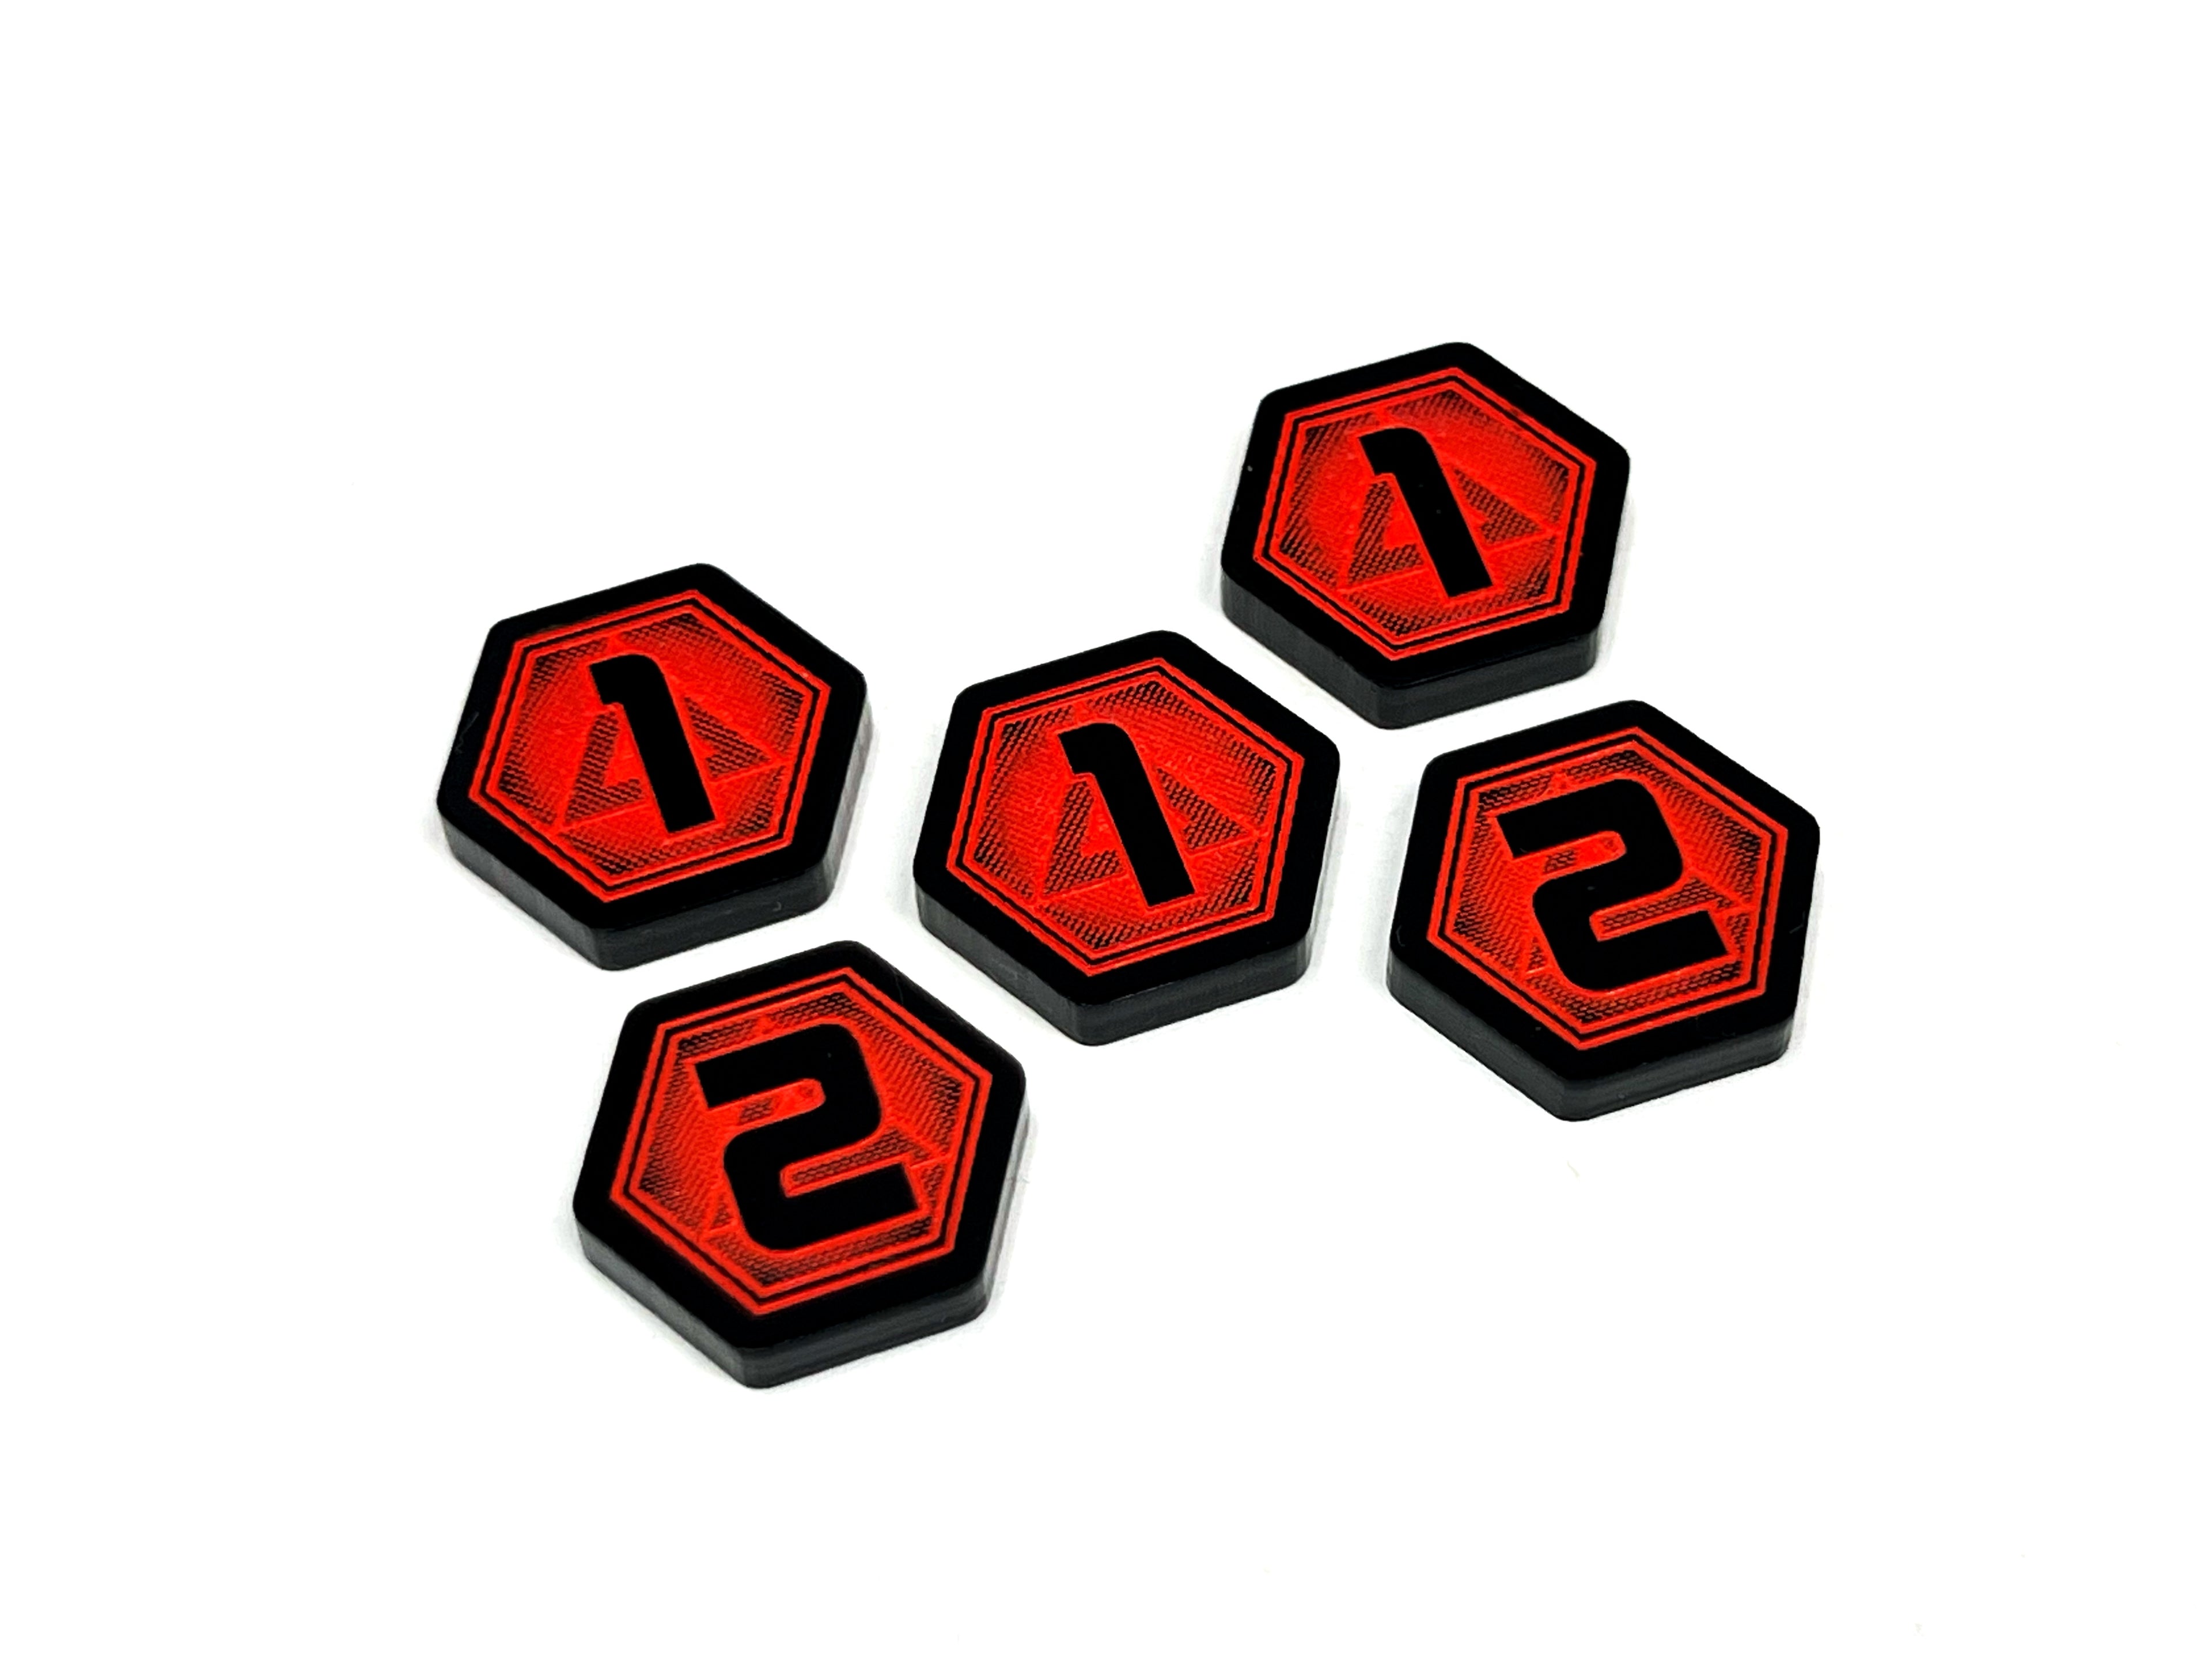 5 x 1/2 Damage Tokens for Star Wars Shatterpoint (Double Sided)